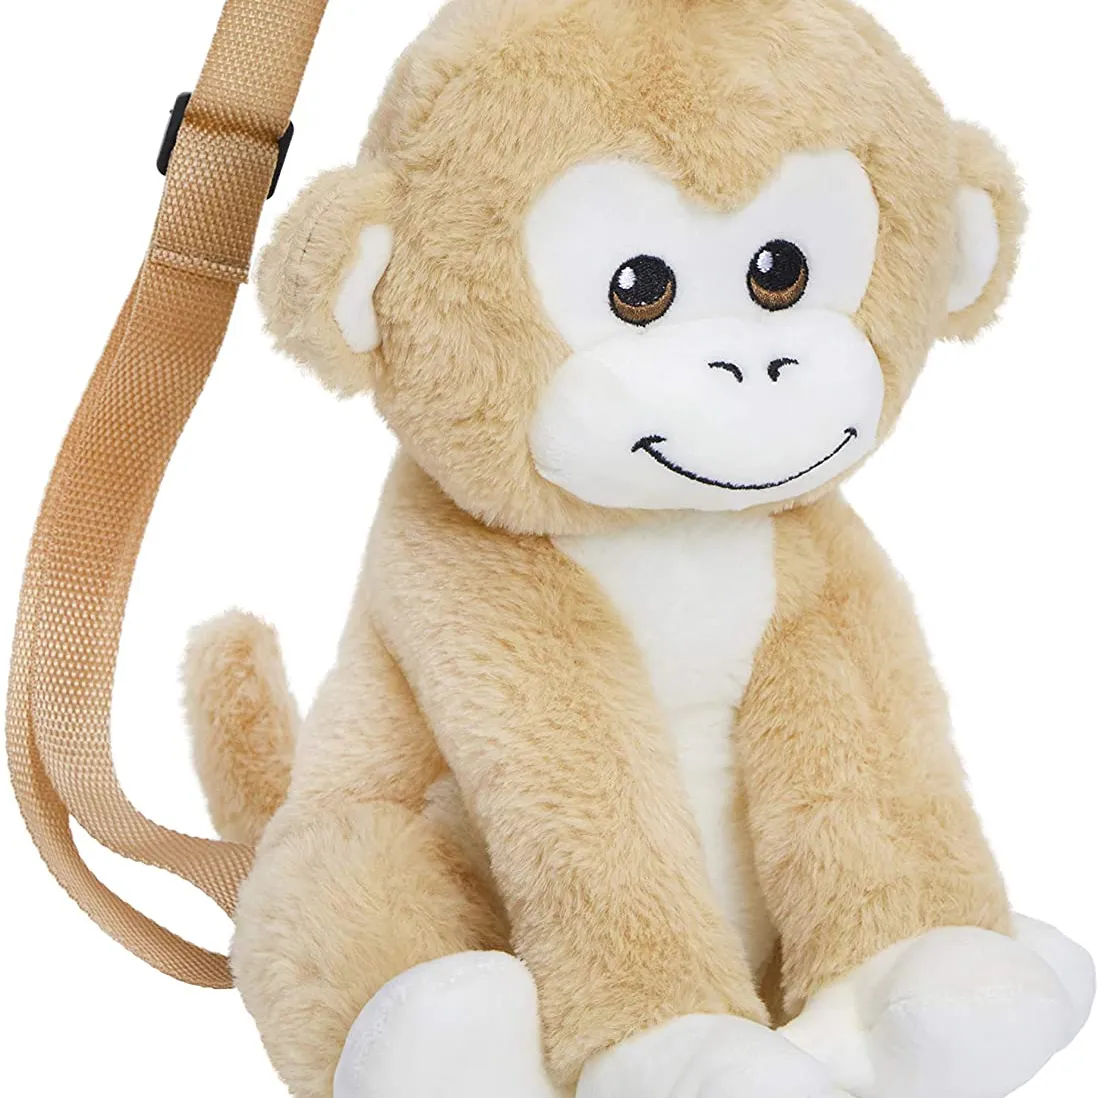 NEW CUTE Monkey Backpack Plush Toy Soft Stuffed Animal Gifts for Kids Bag for Travel and Adventure Napkins Bag Snack Backpack